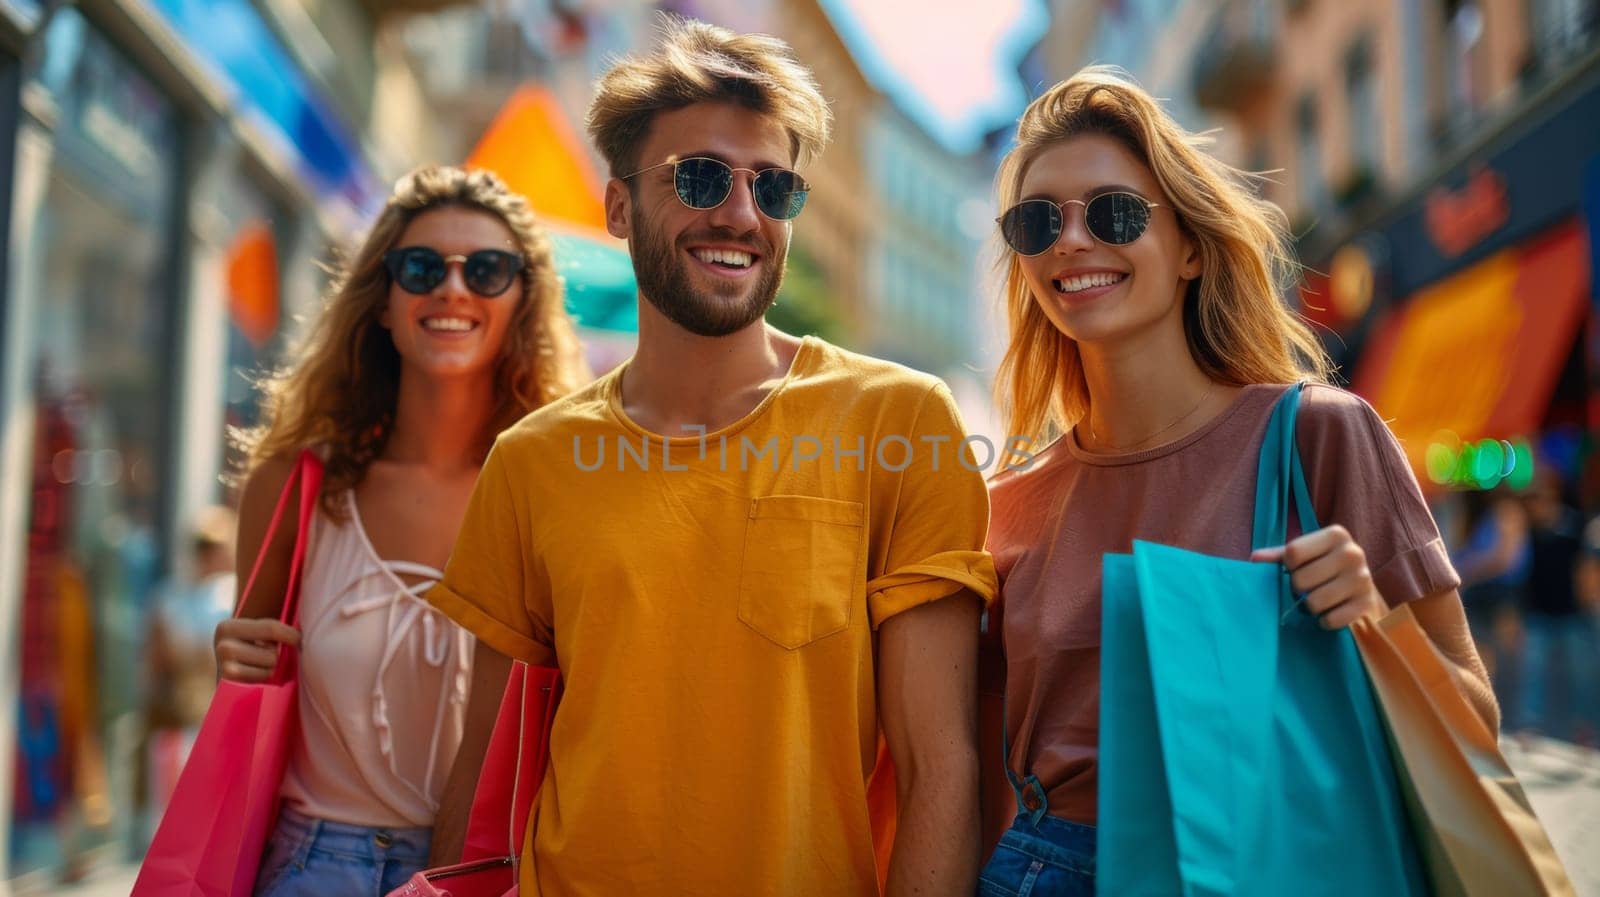 Three people standing in a street with shopping bags